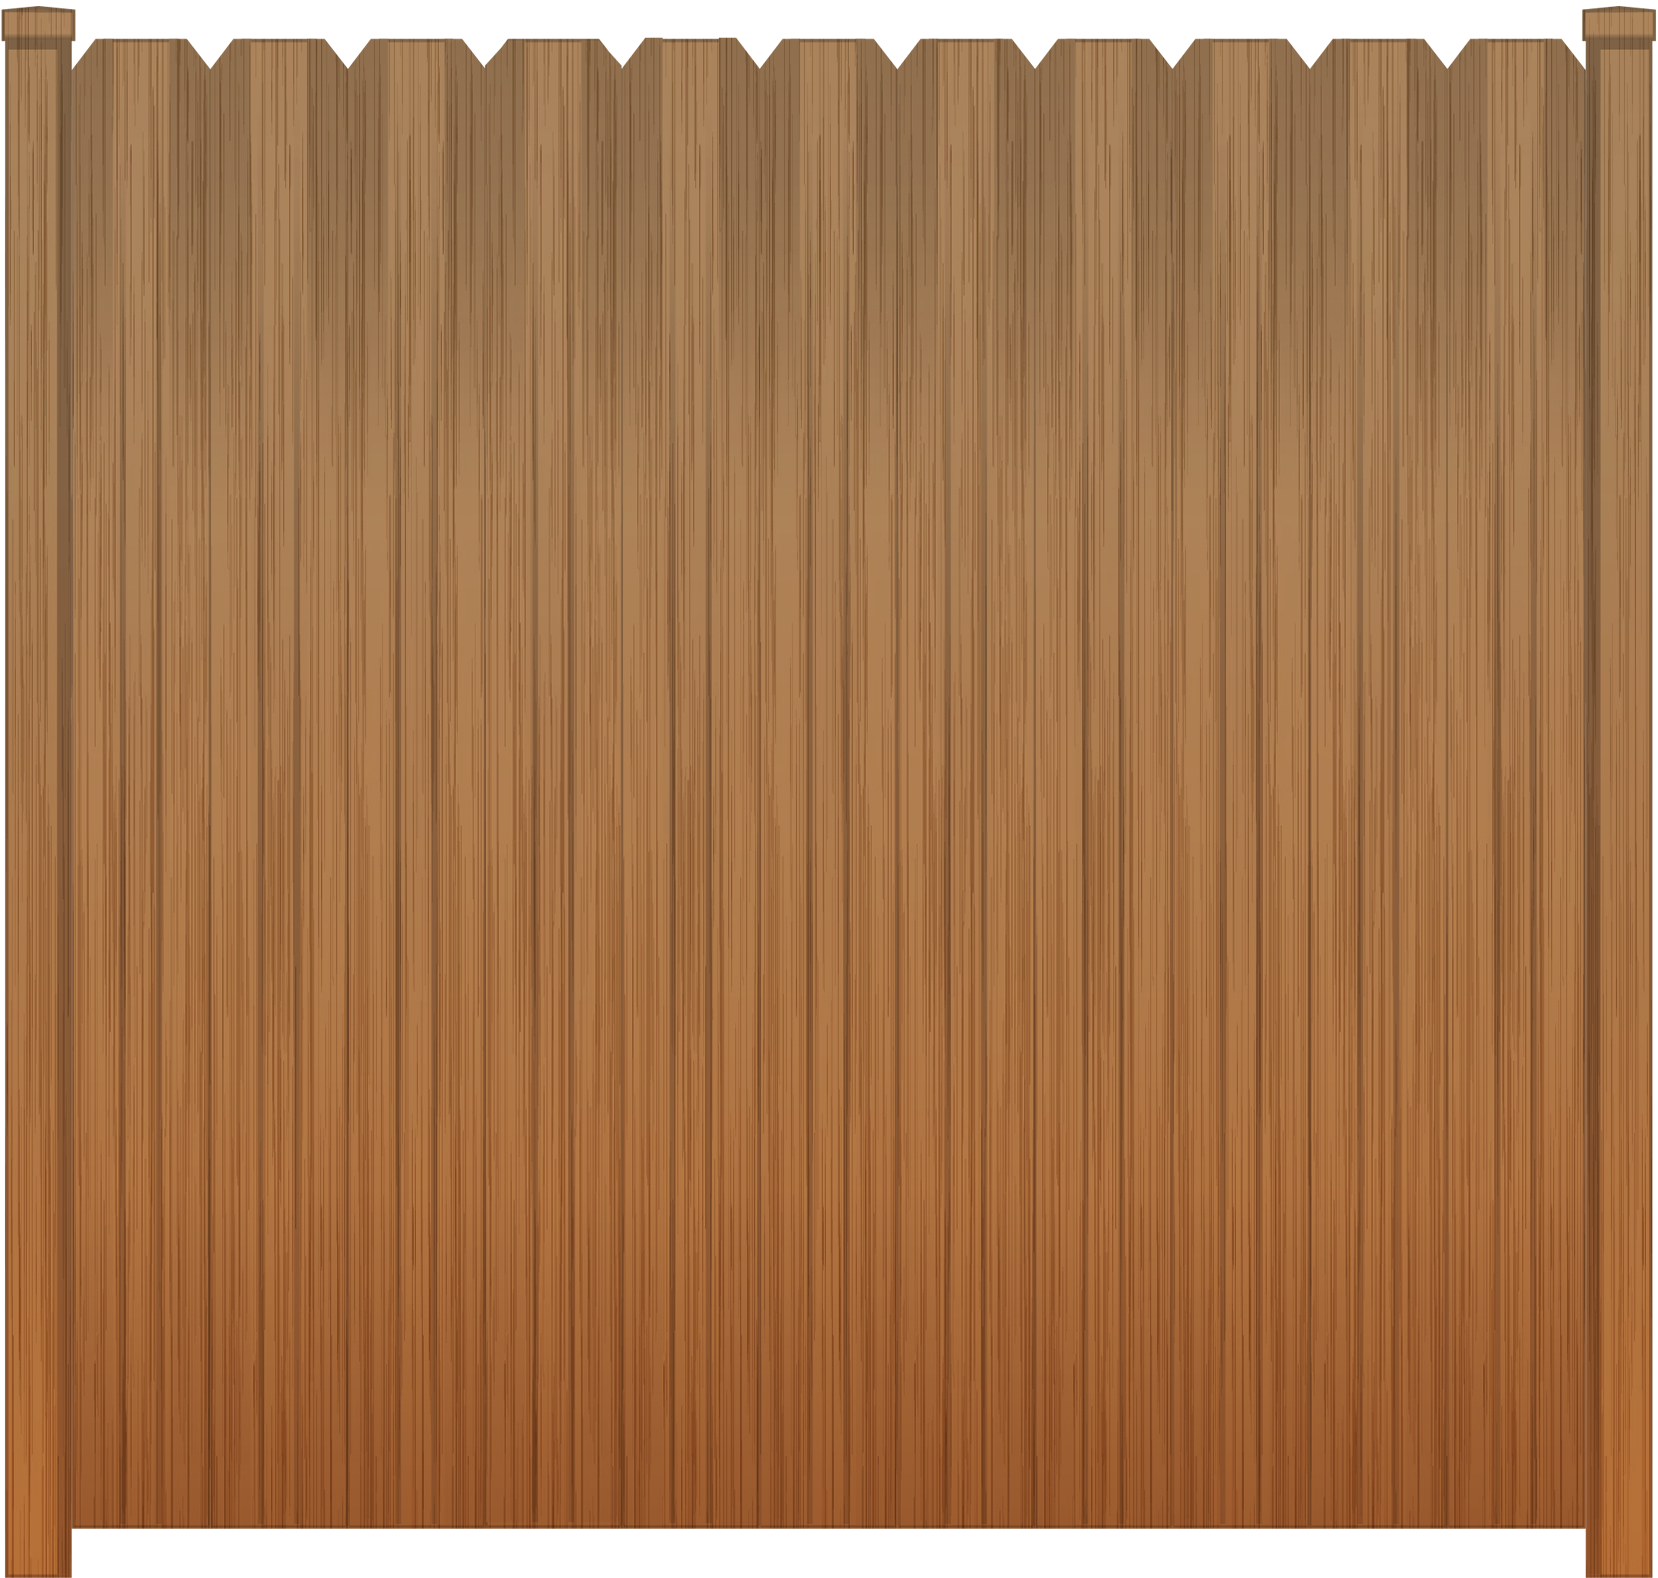 Rendering of a Woodgrain Metal Privacy Fence from Fence Supply Company Serving Southwest Florida, Central Florida, & South Florida